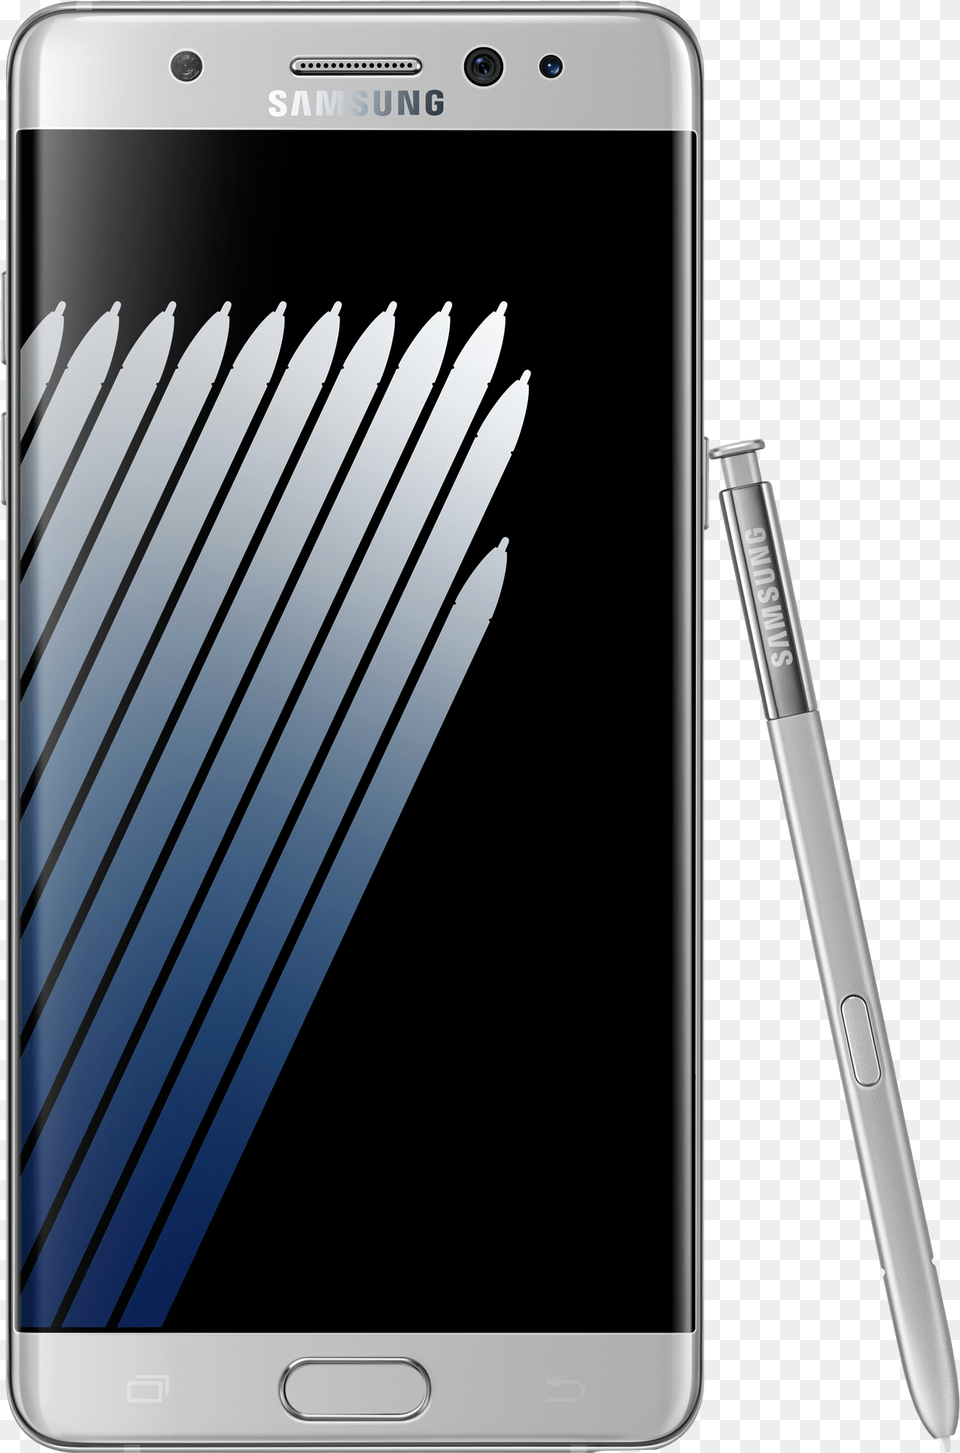 Samsung Galaxy Note 7 Price, Electronics, Mobile Phone, Phone, Festival Free Png Download